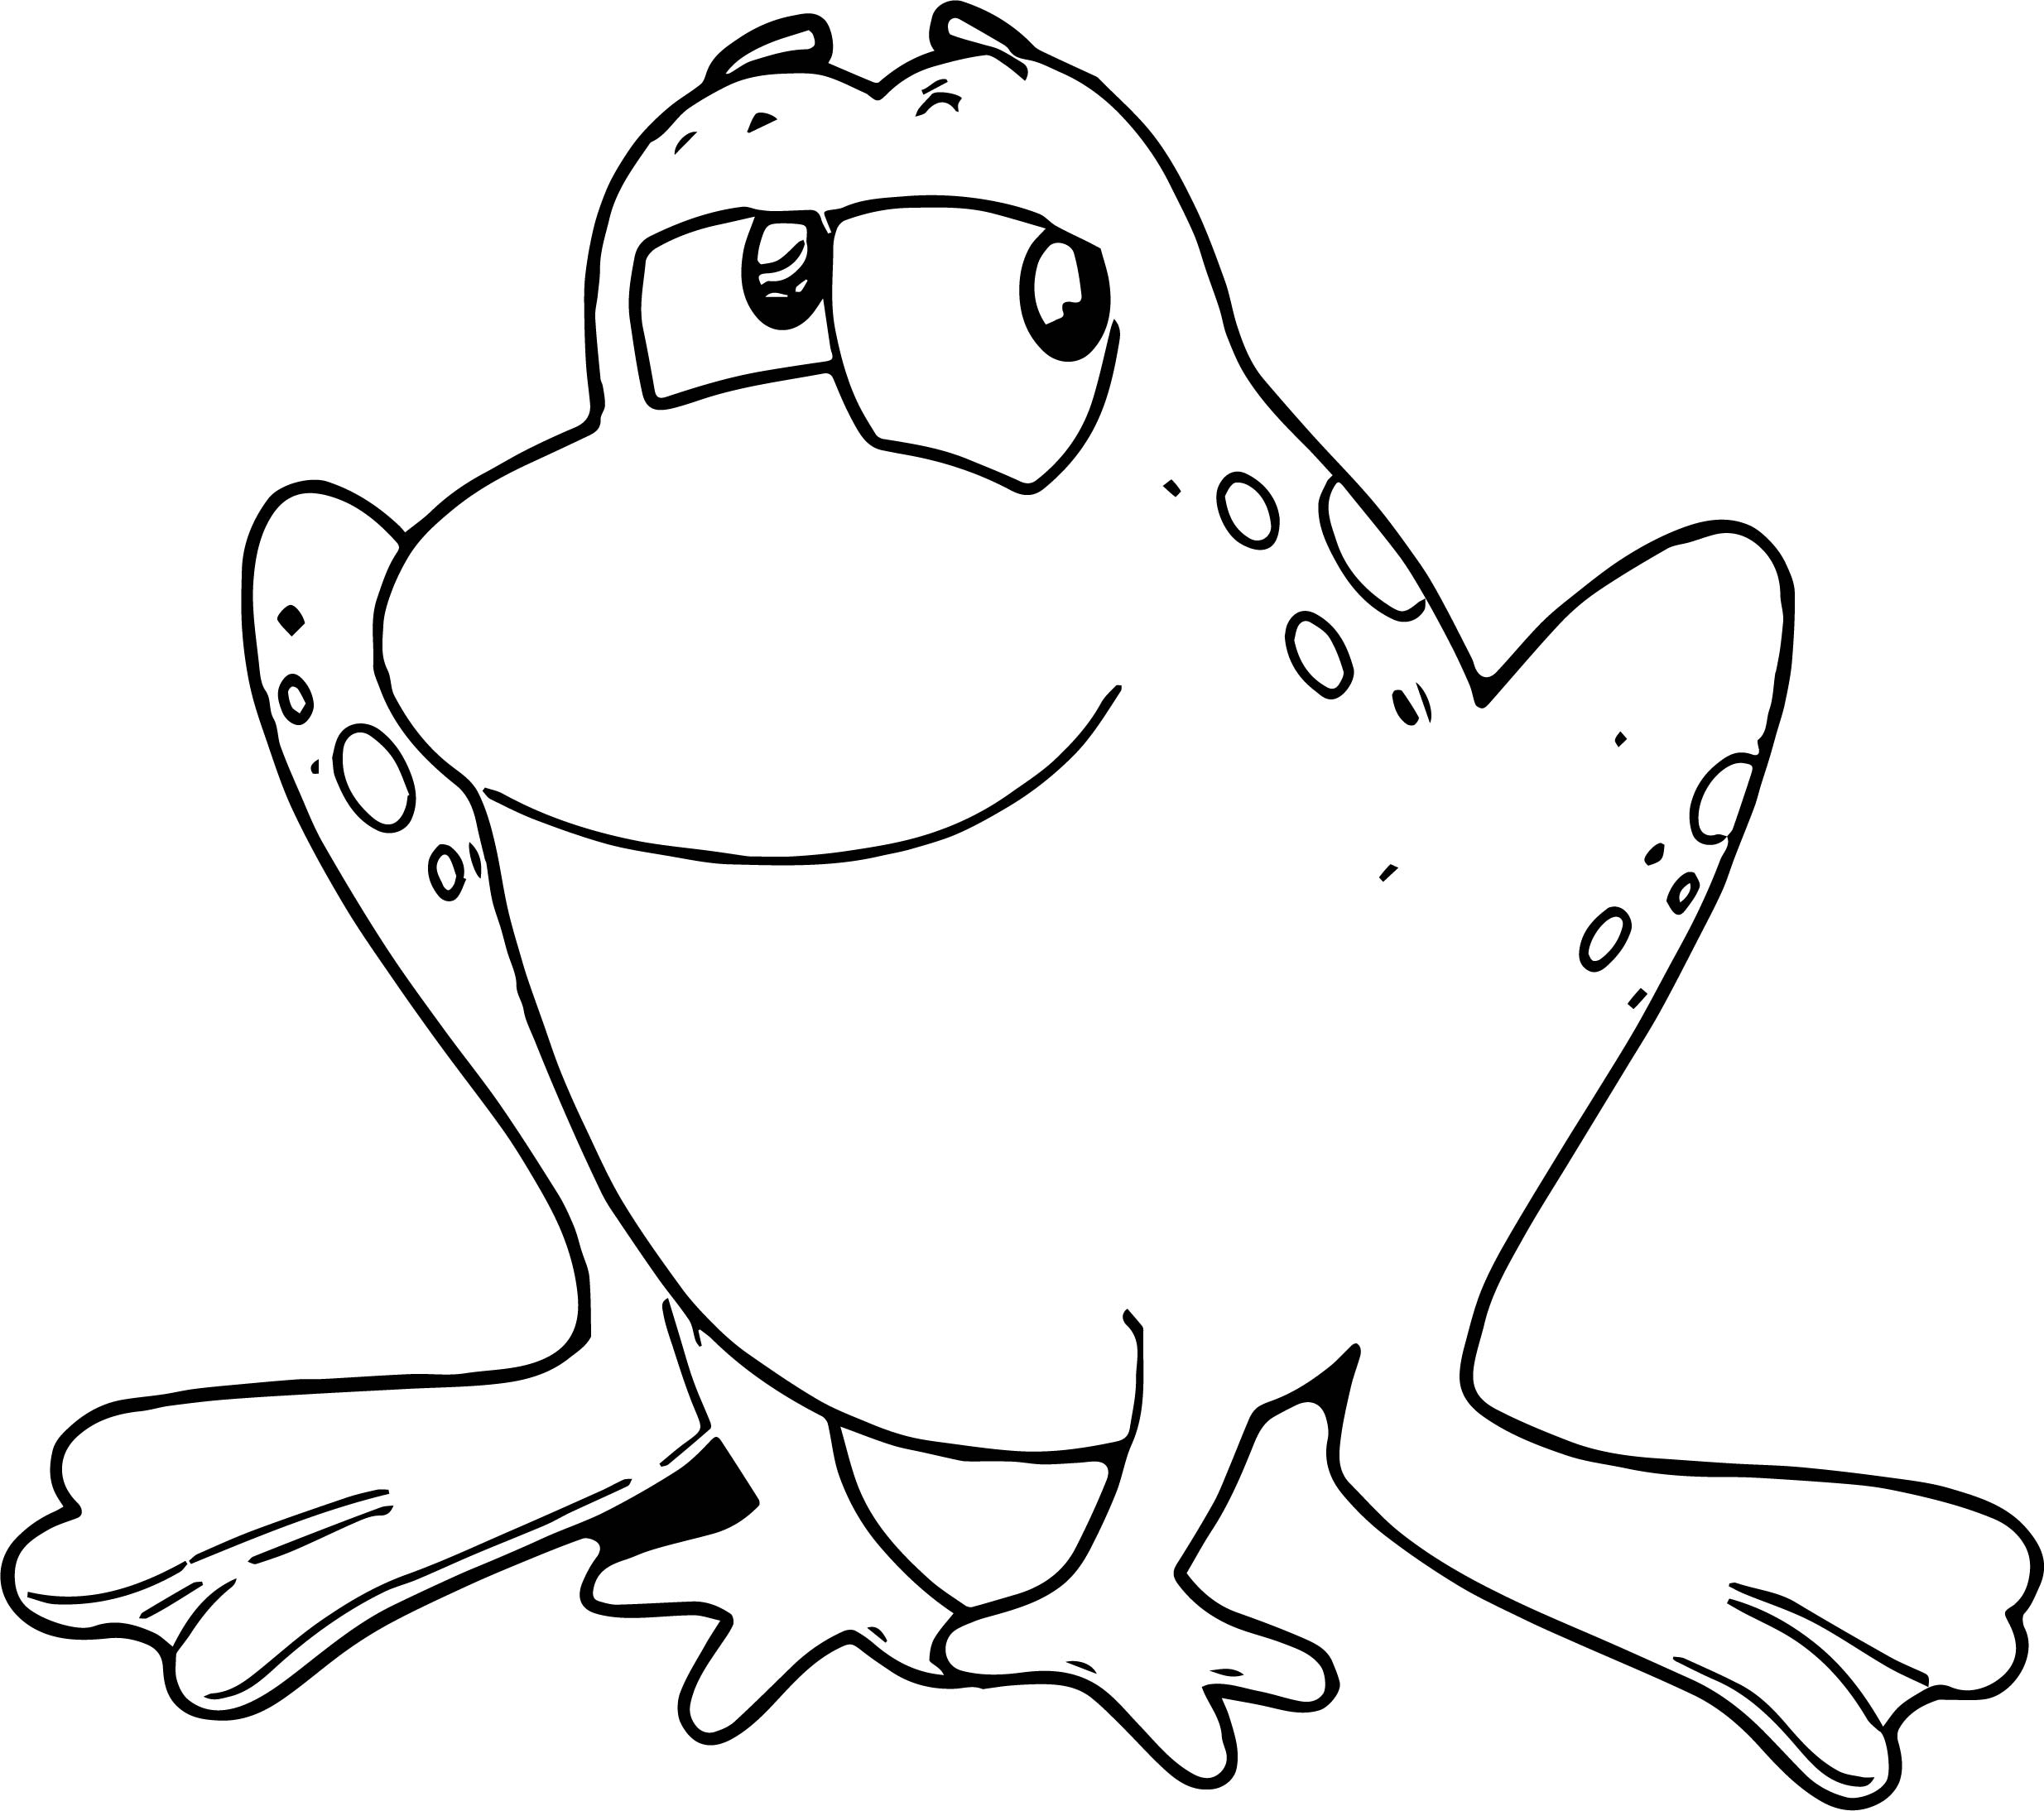 Frog Relax Coloring Page | Wecoloringpage.com